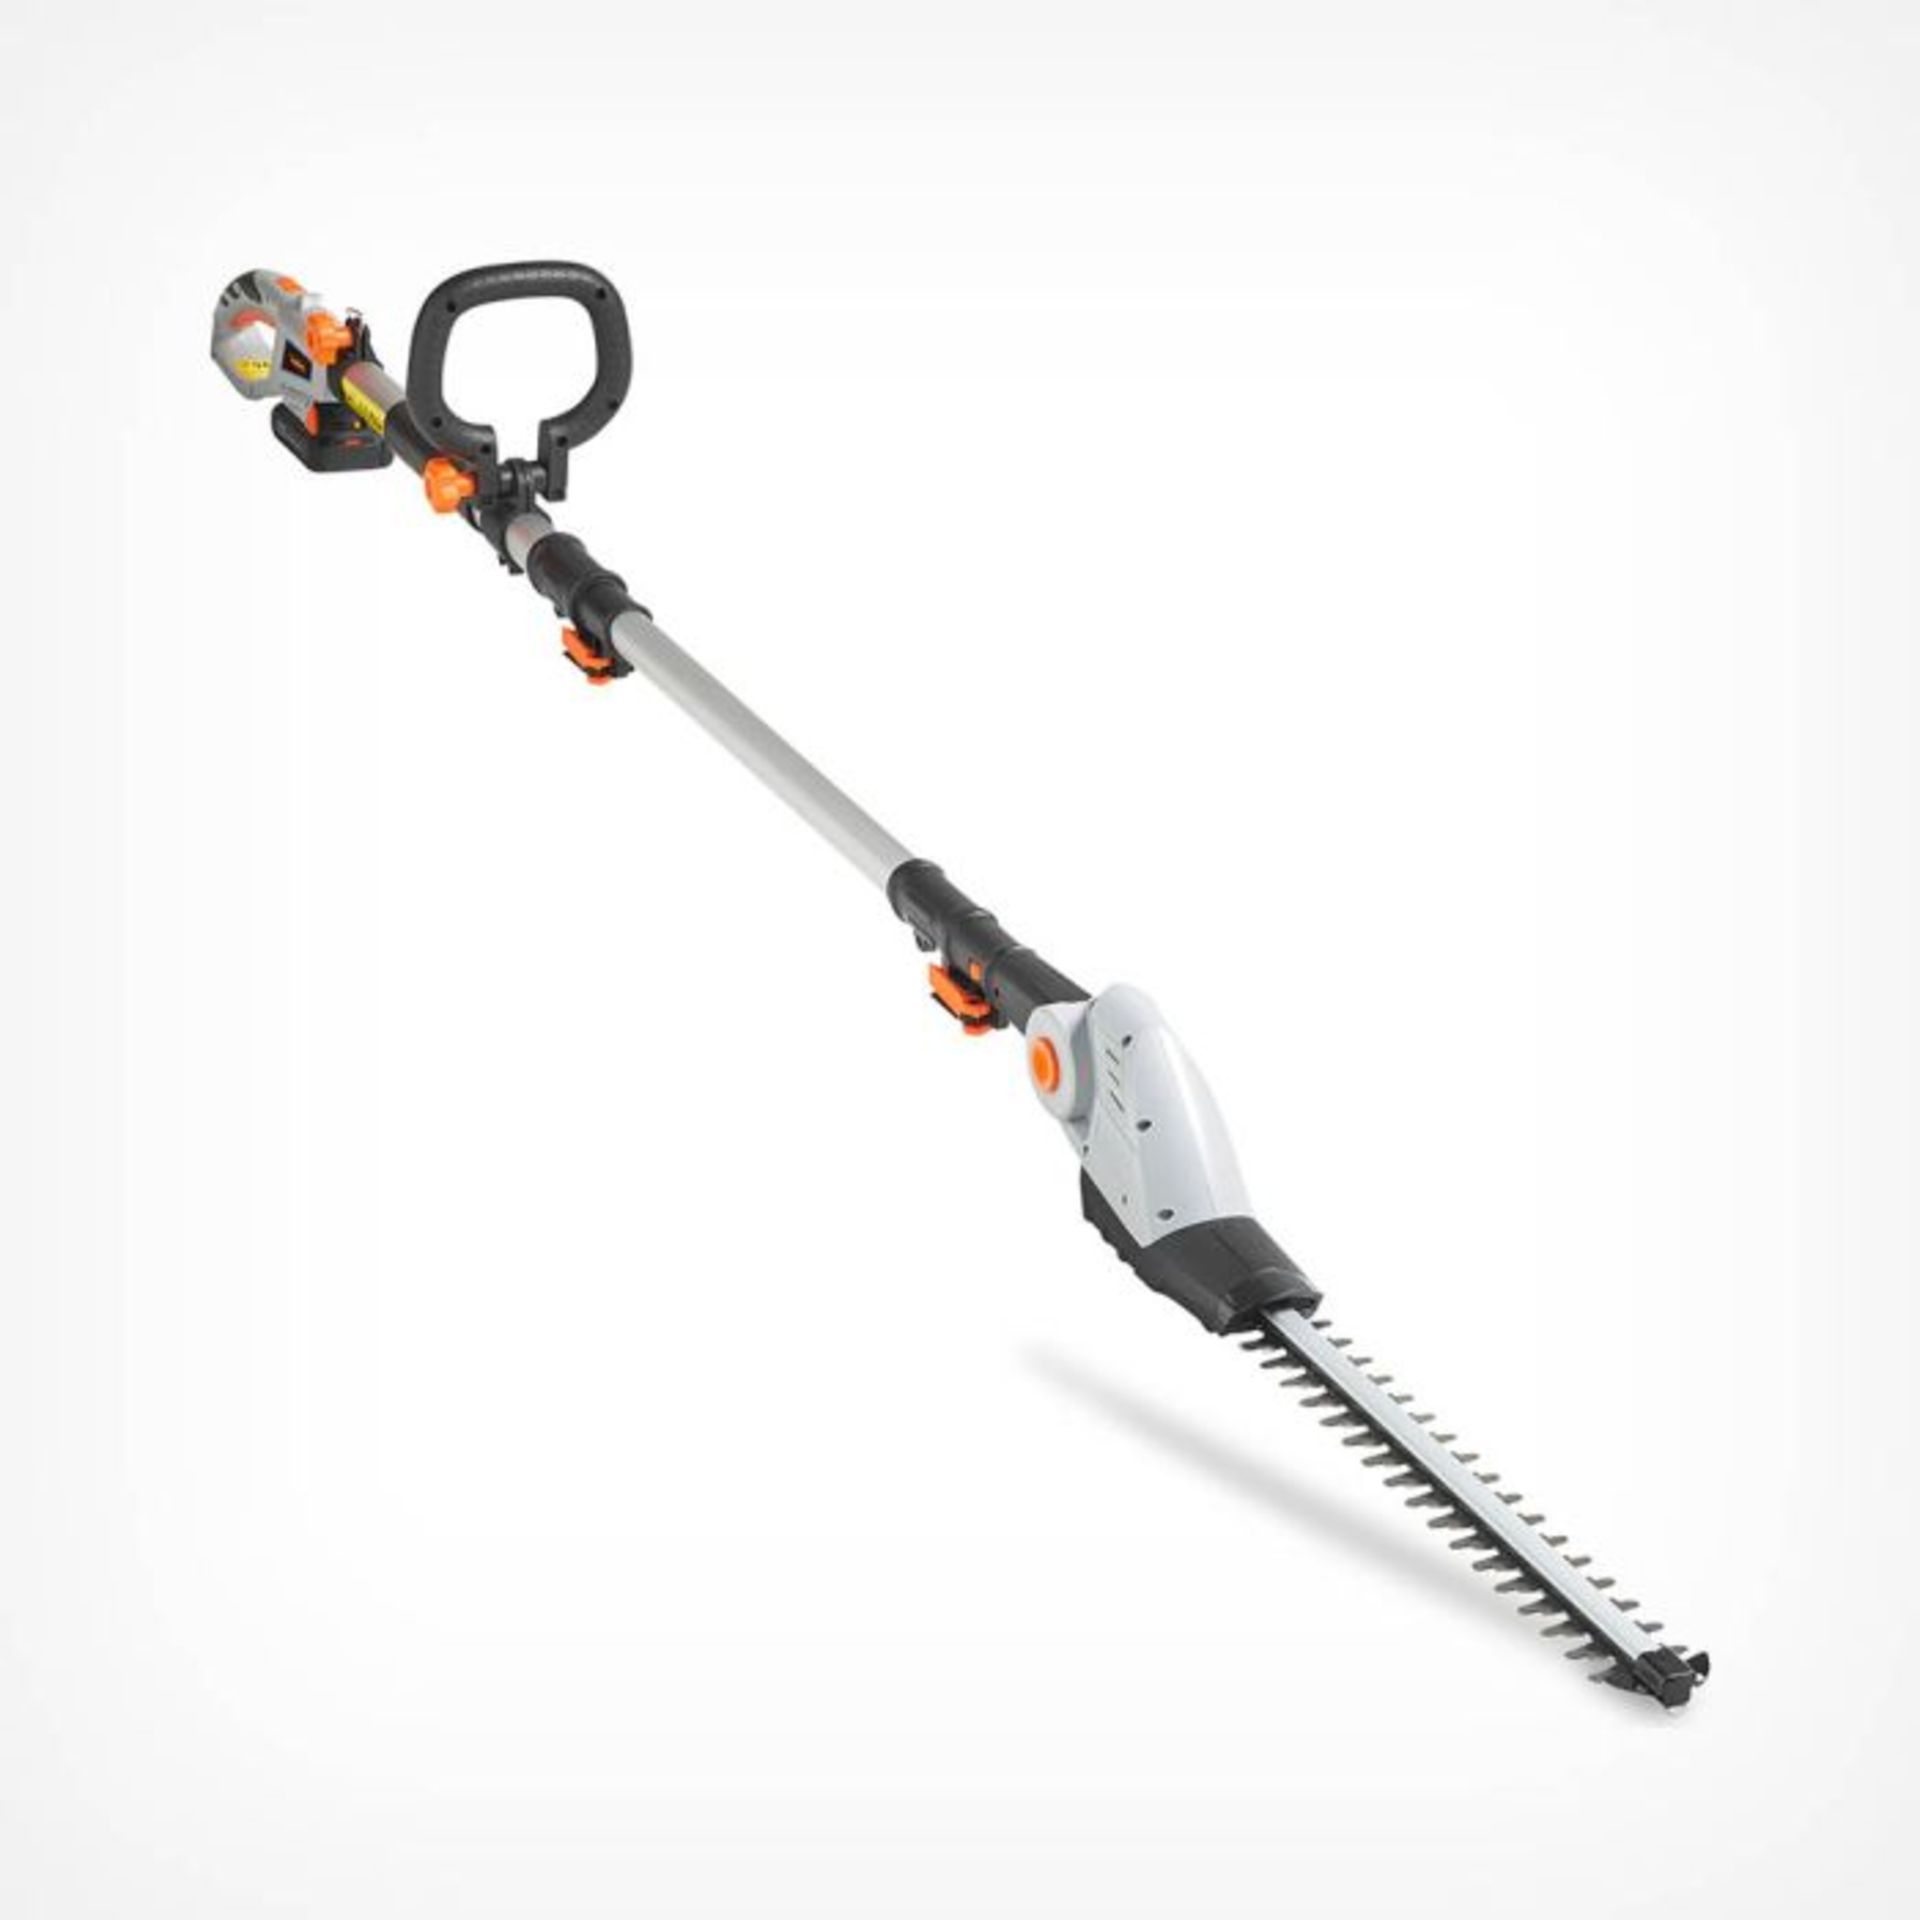 G-series Cordless Pole Trimmer. Cut hedges quickly and conveniently with the VonHaus 20V Max. Pole